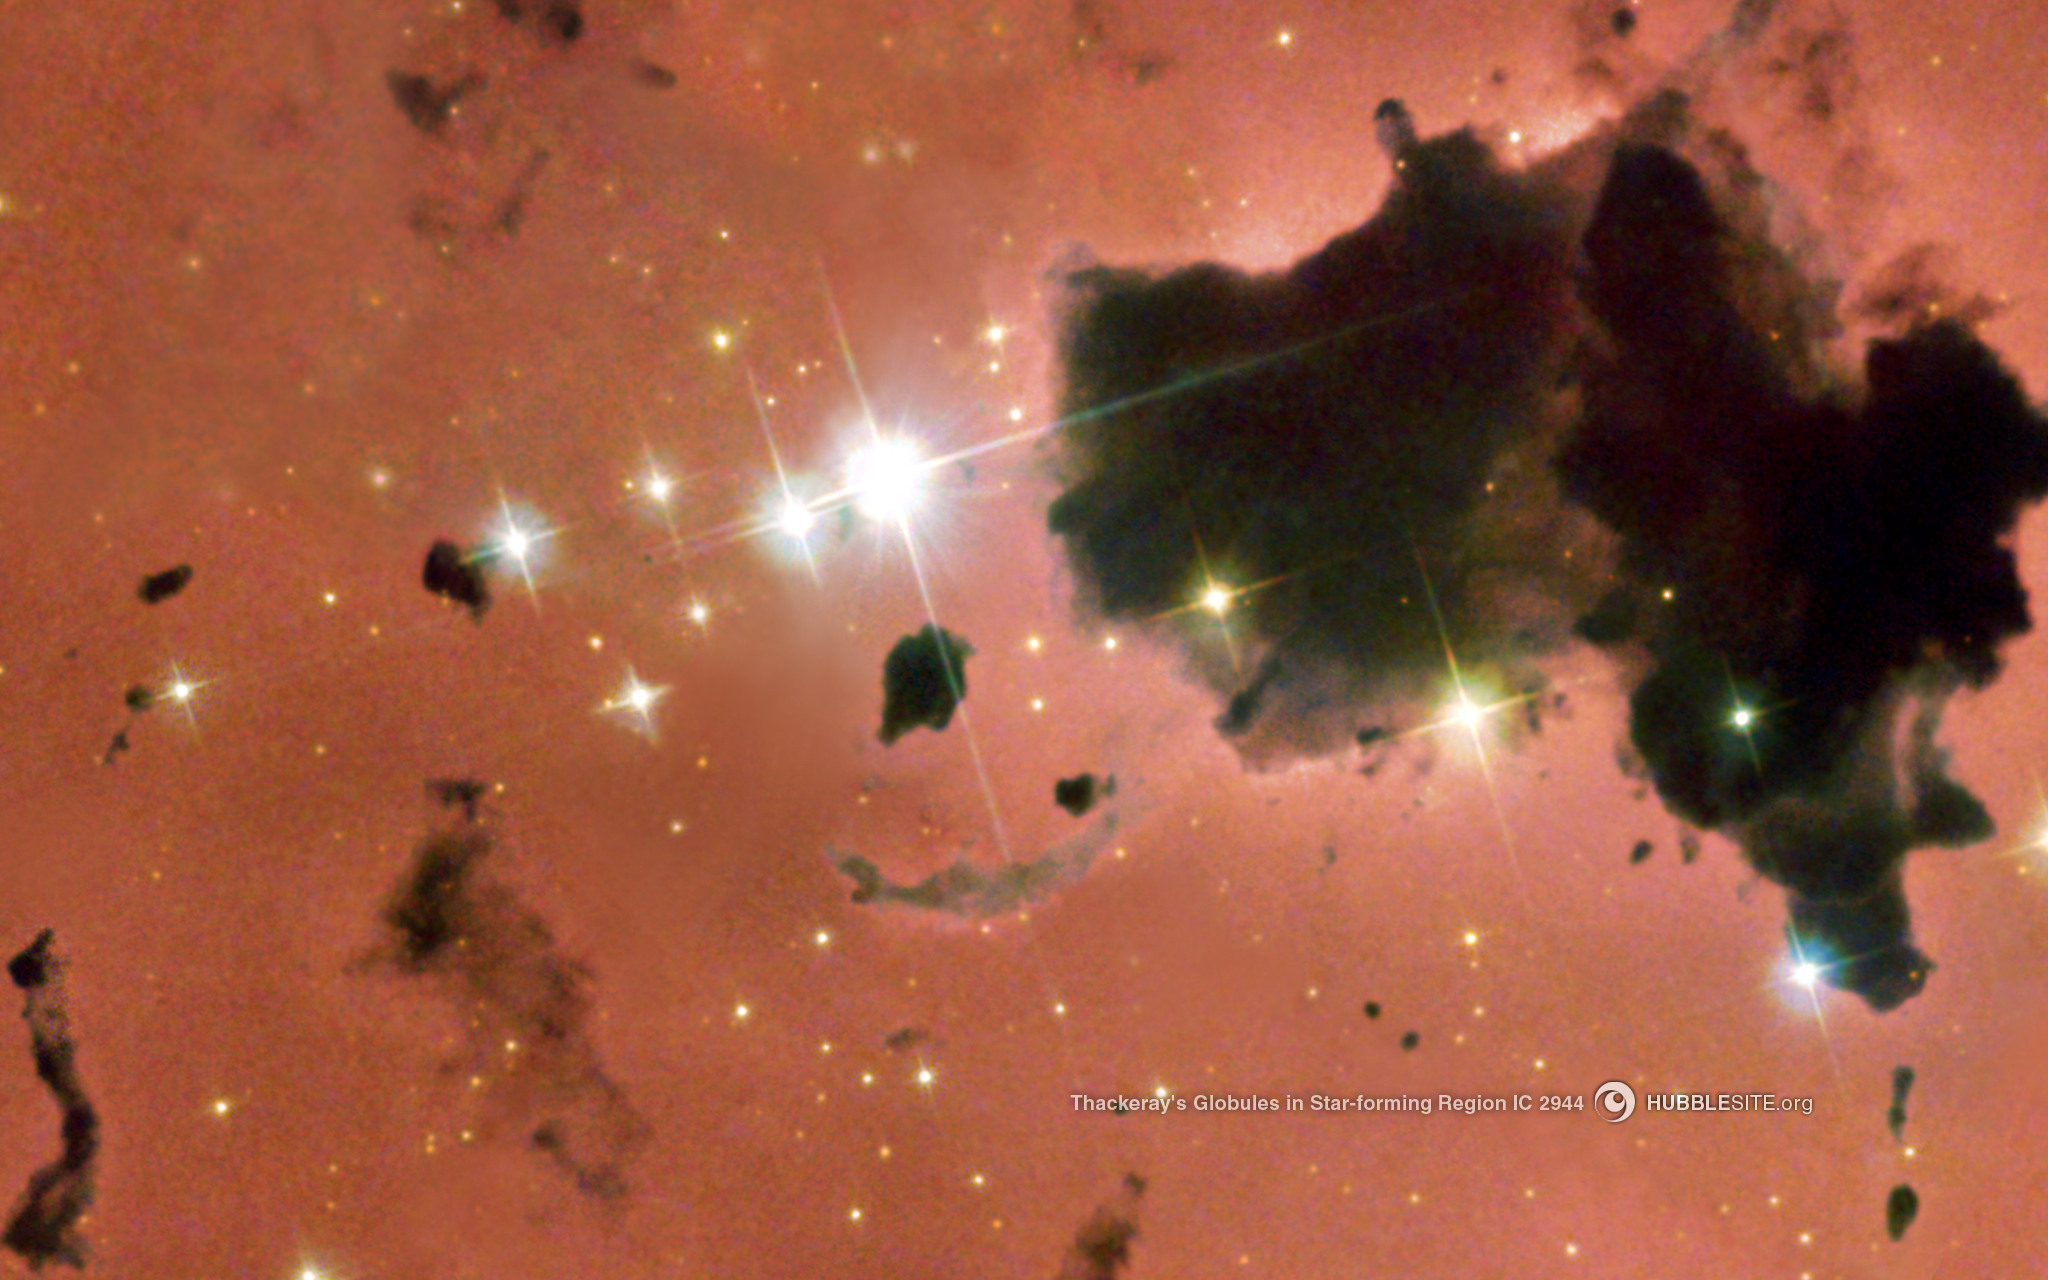 Thackeray's Globules in the Star-Forming Region IC 2944